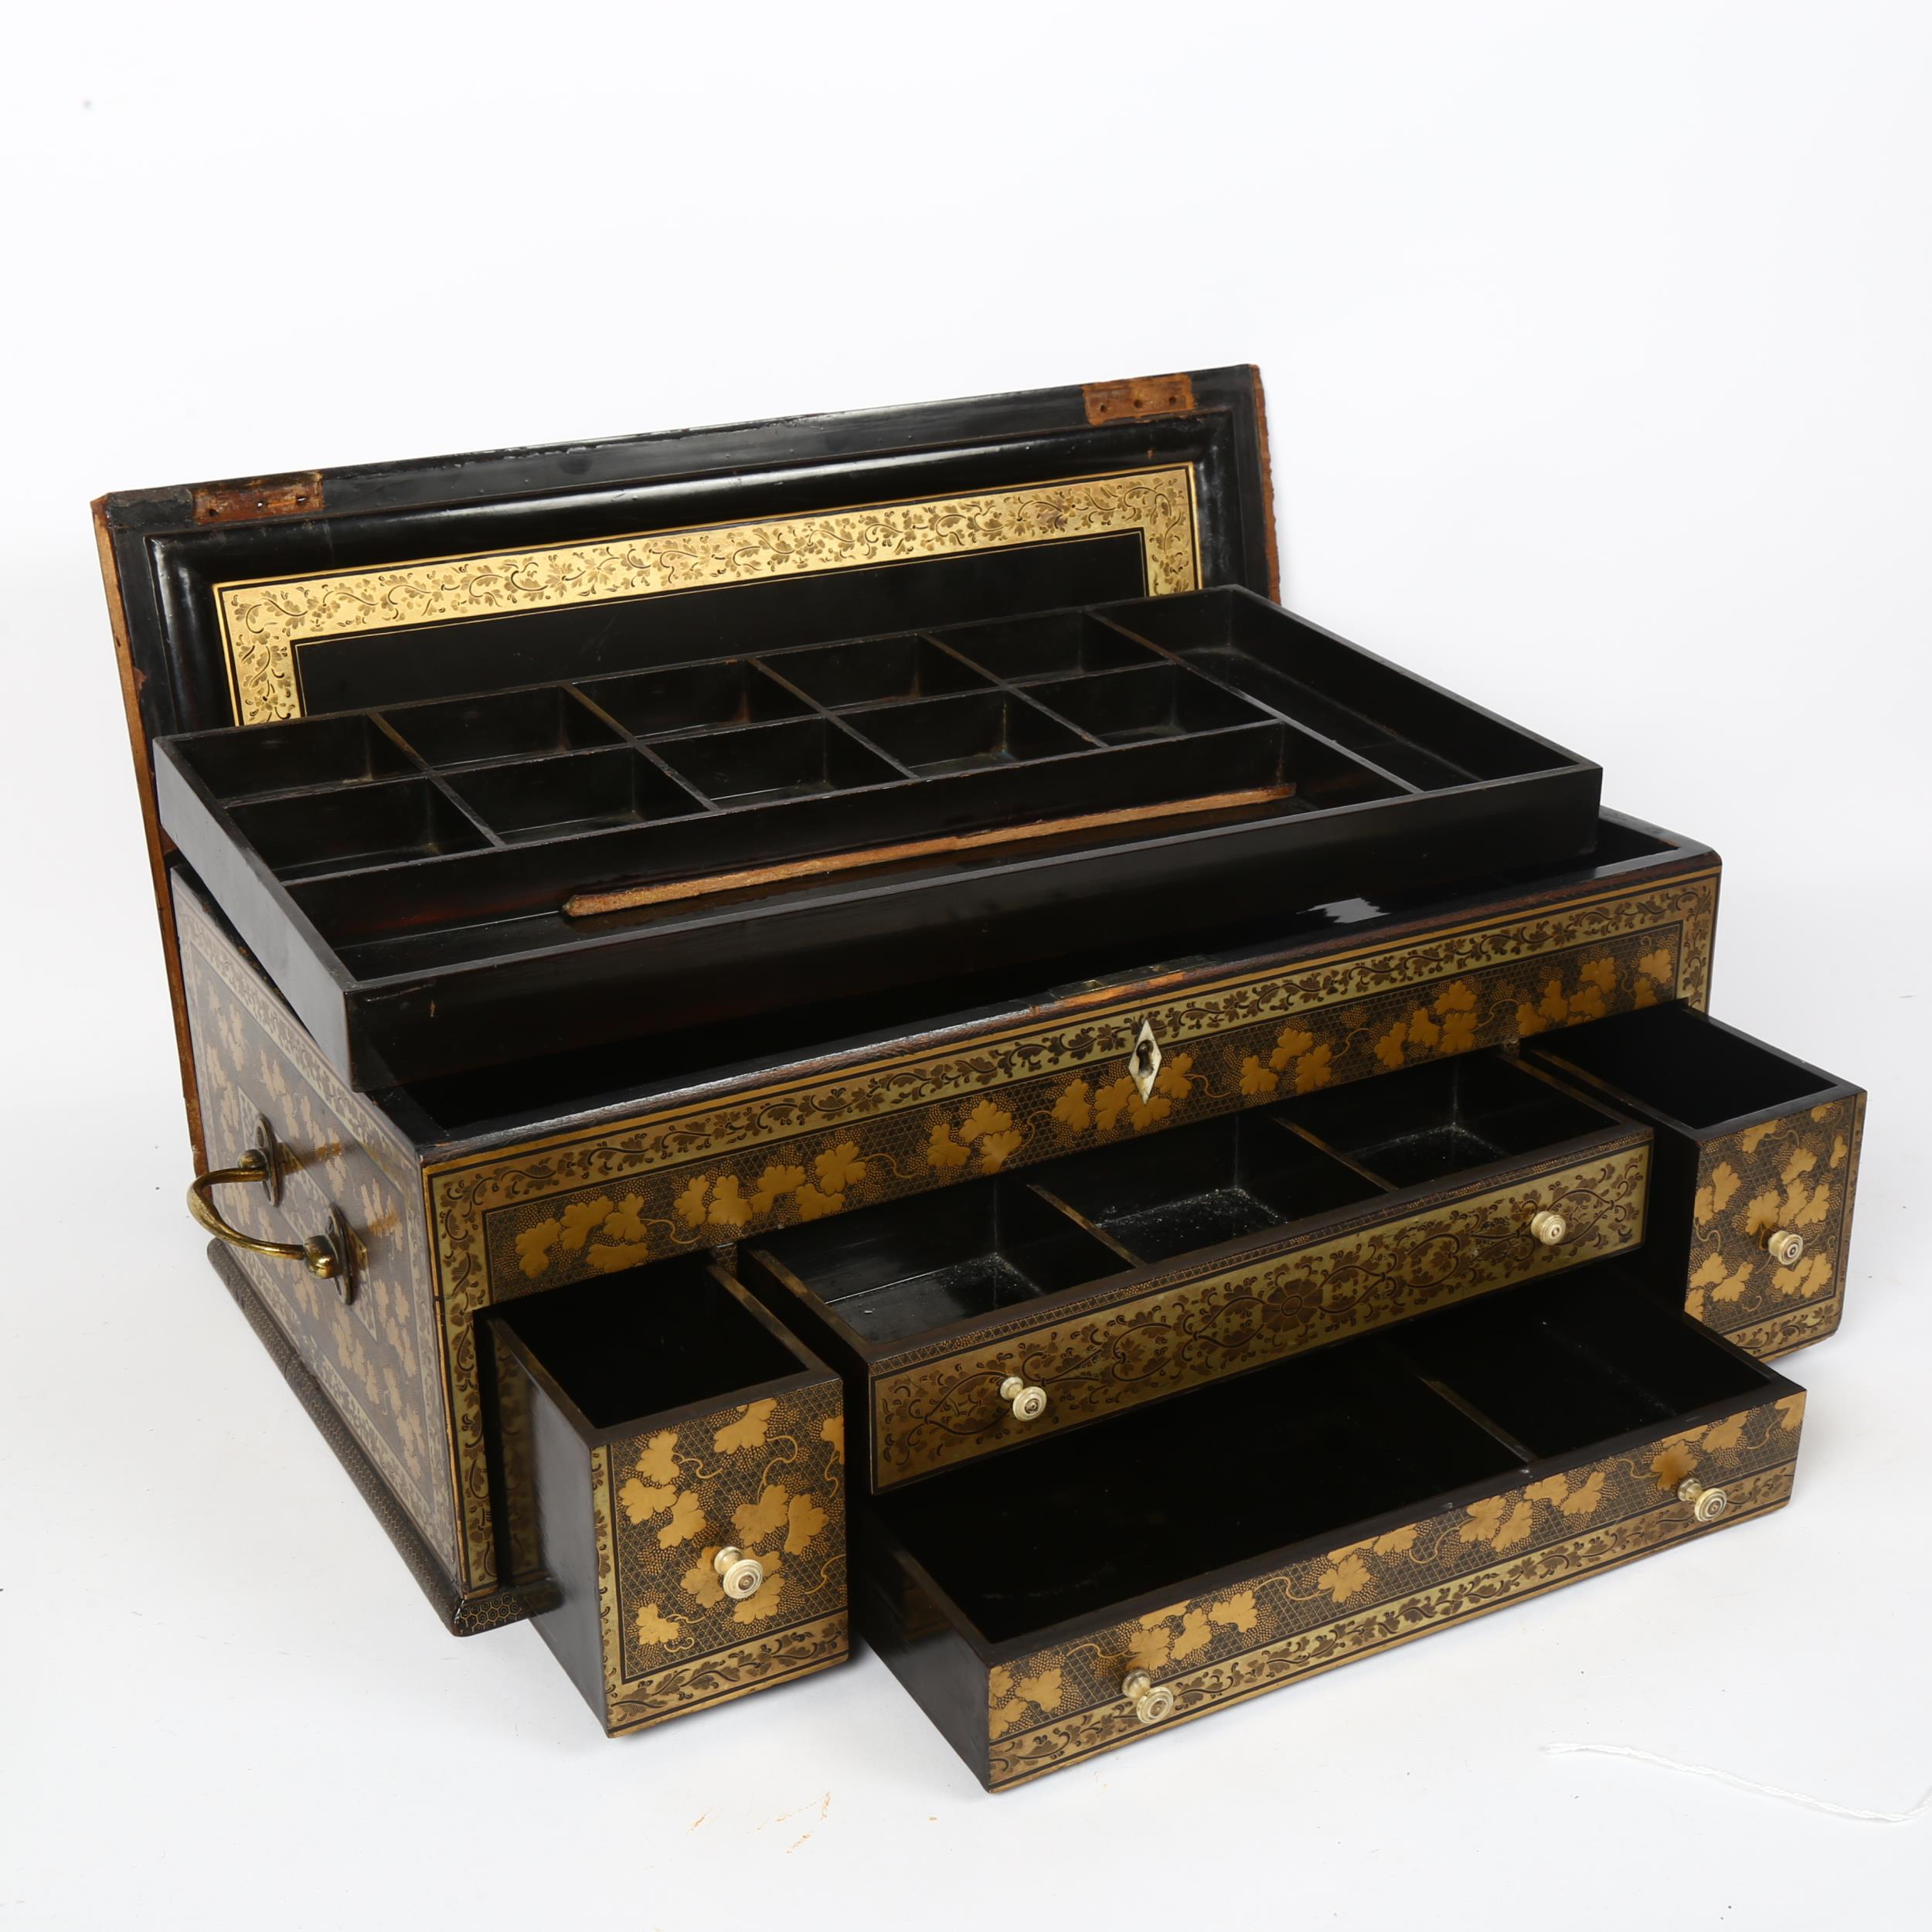 An Antique Anglo-Indian lacquered jewel box, with rising lid and fitted drawers, with allover gilded - Image 2 of 2